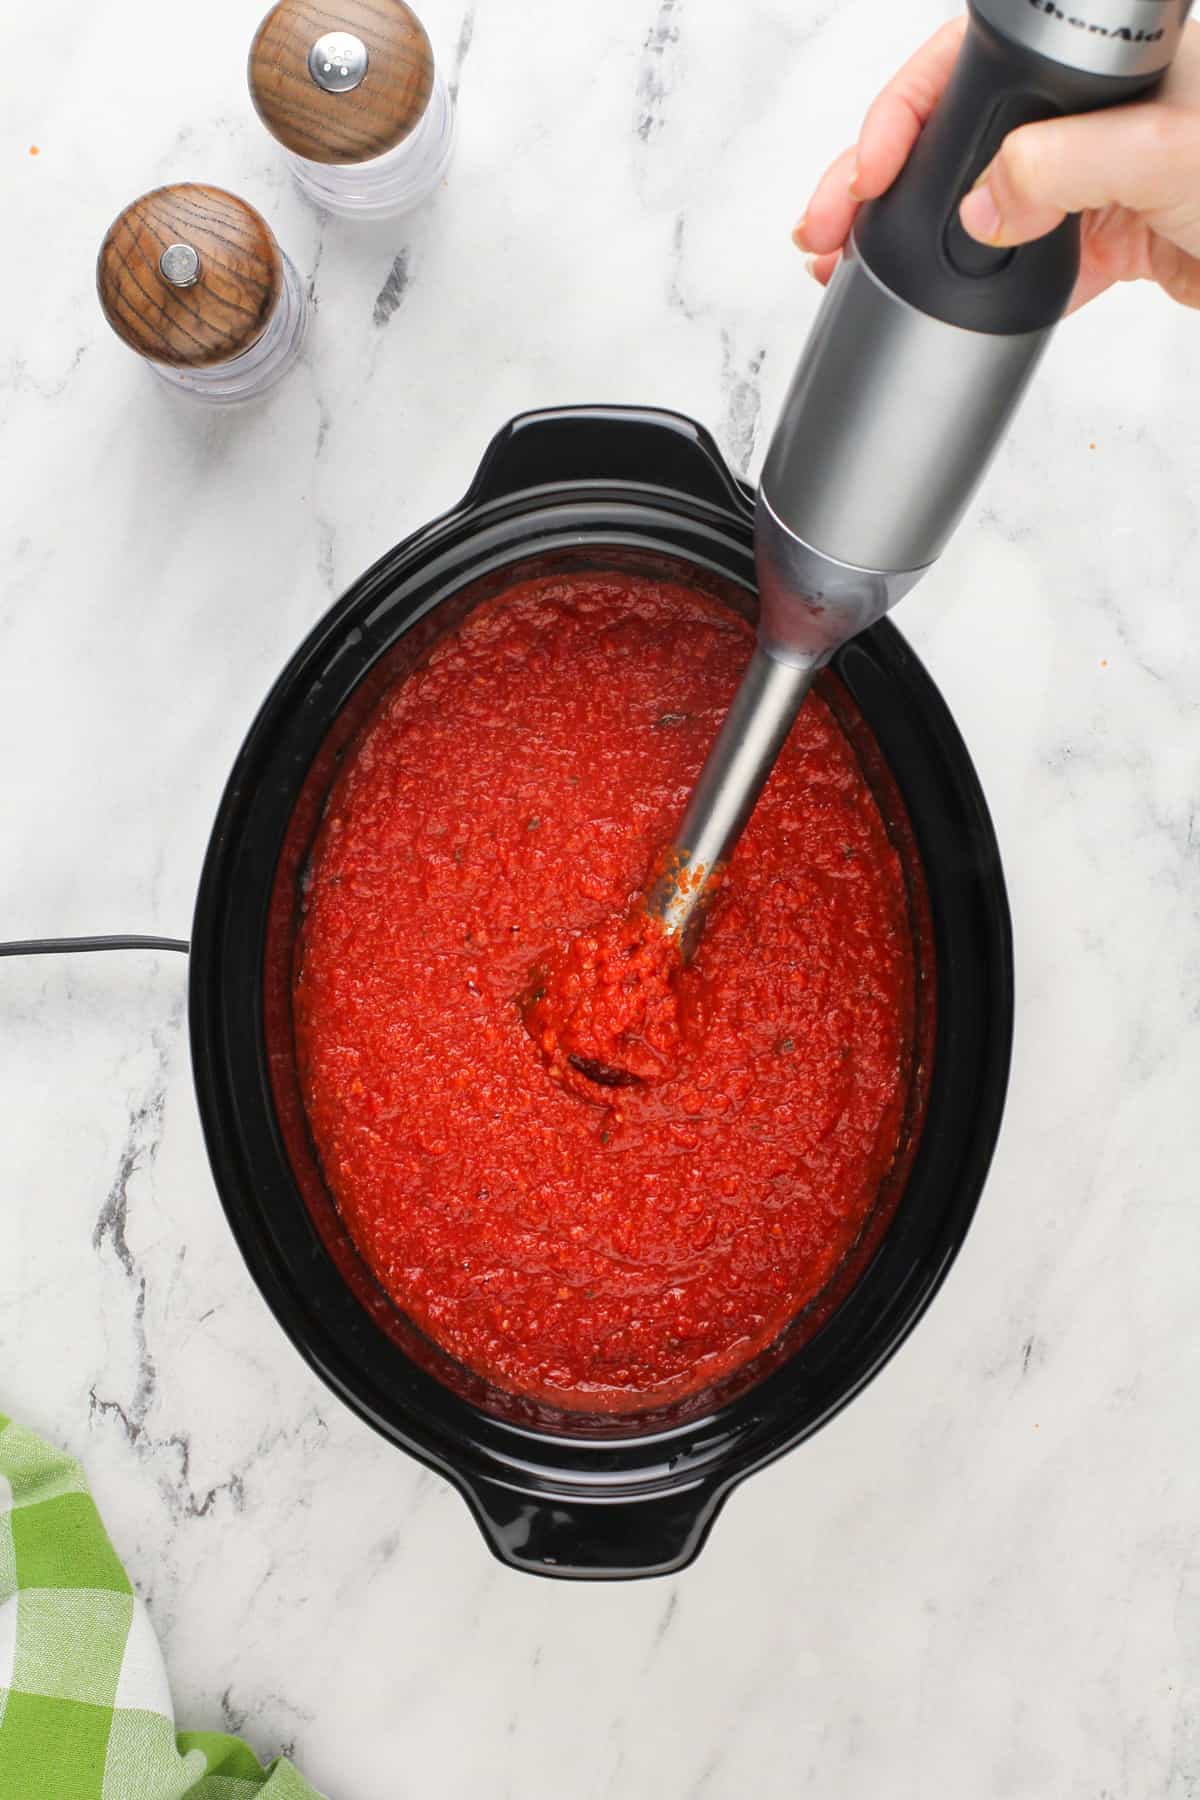 Immersion blender pureeing spaghetti sauce in a slow cooker.